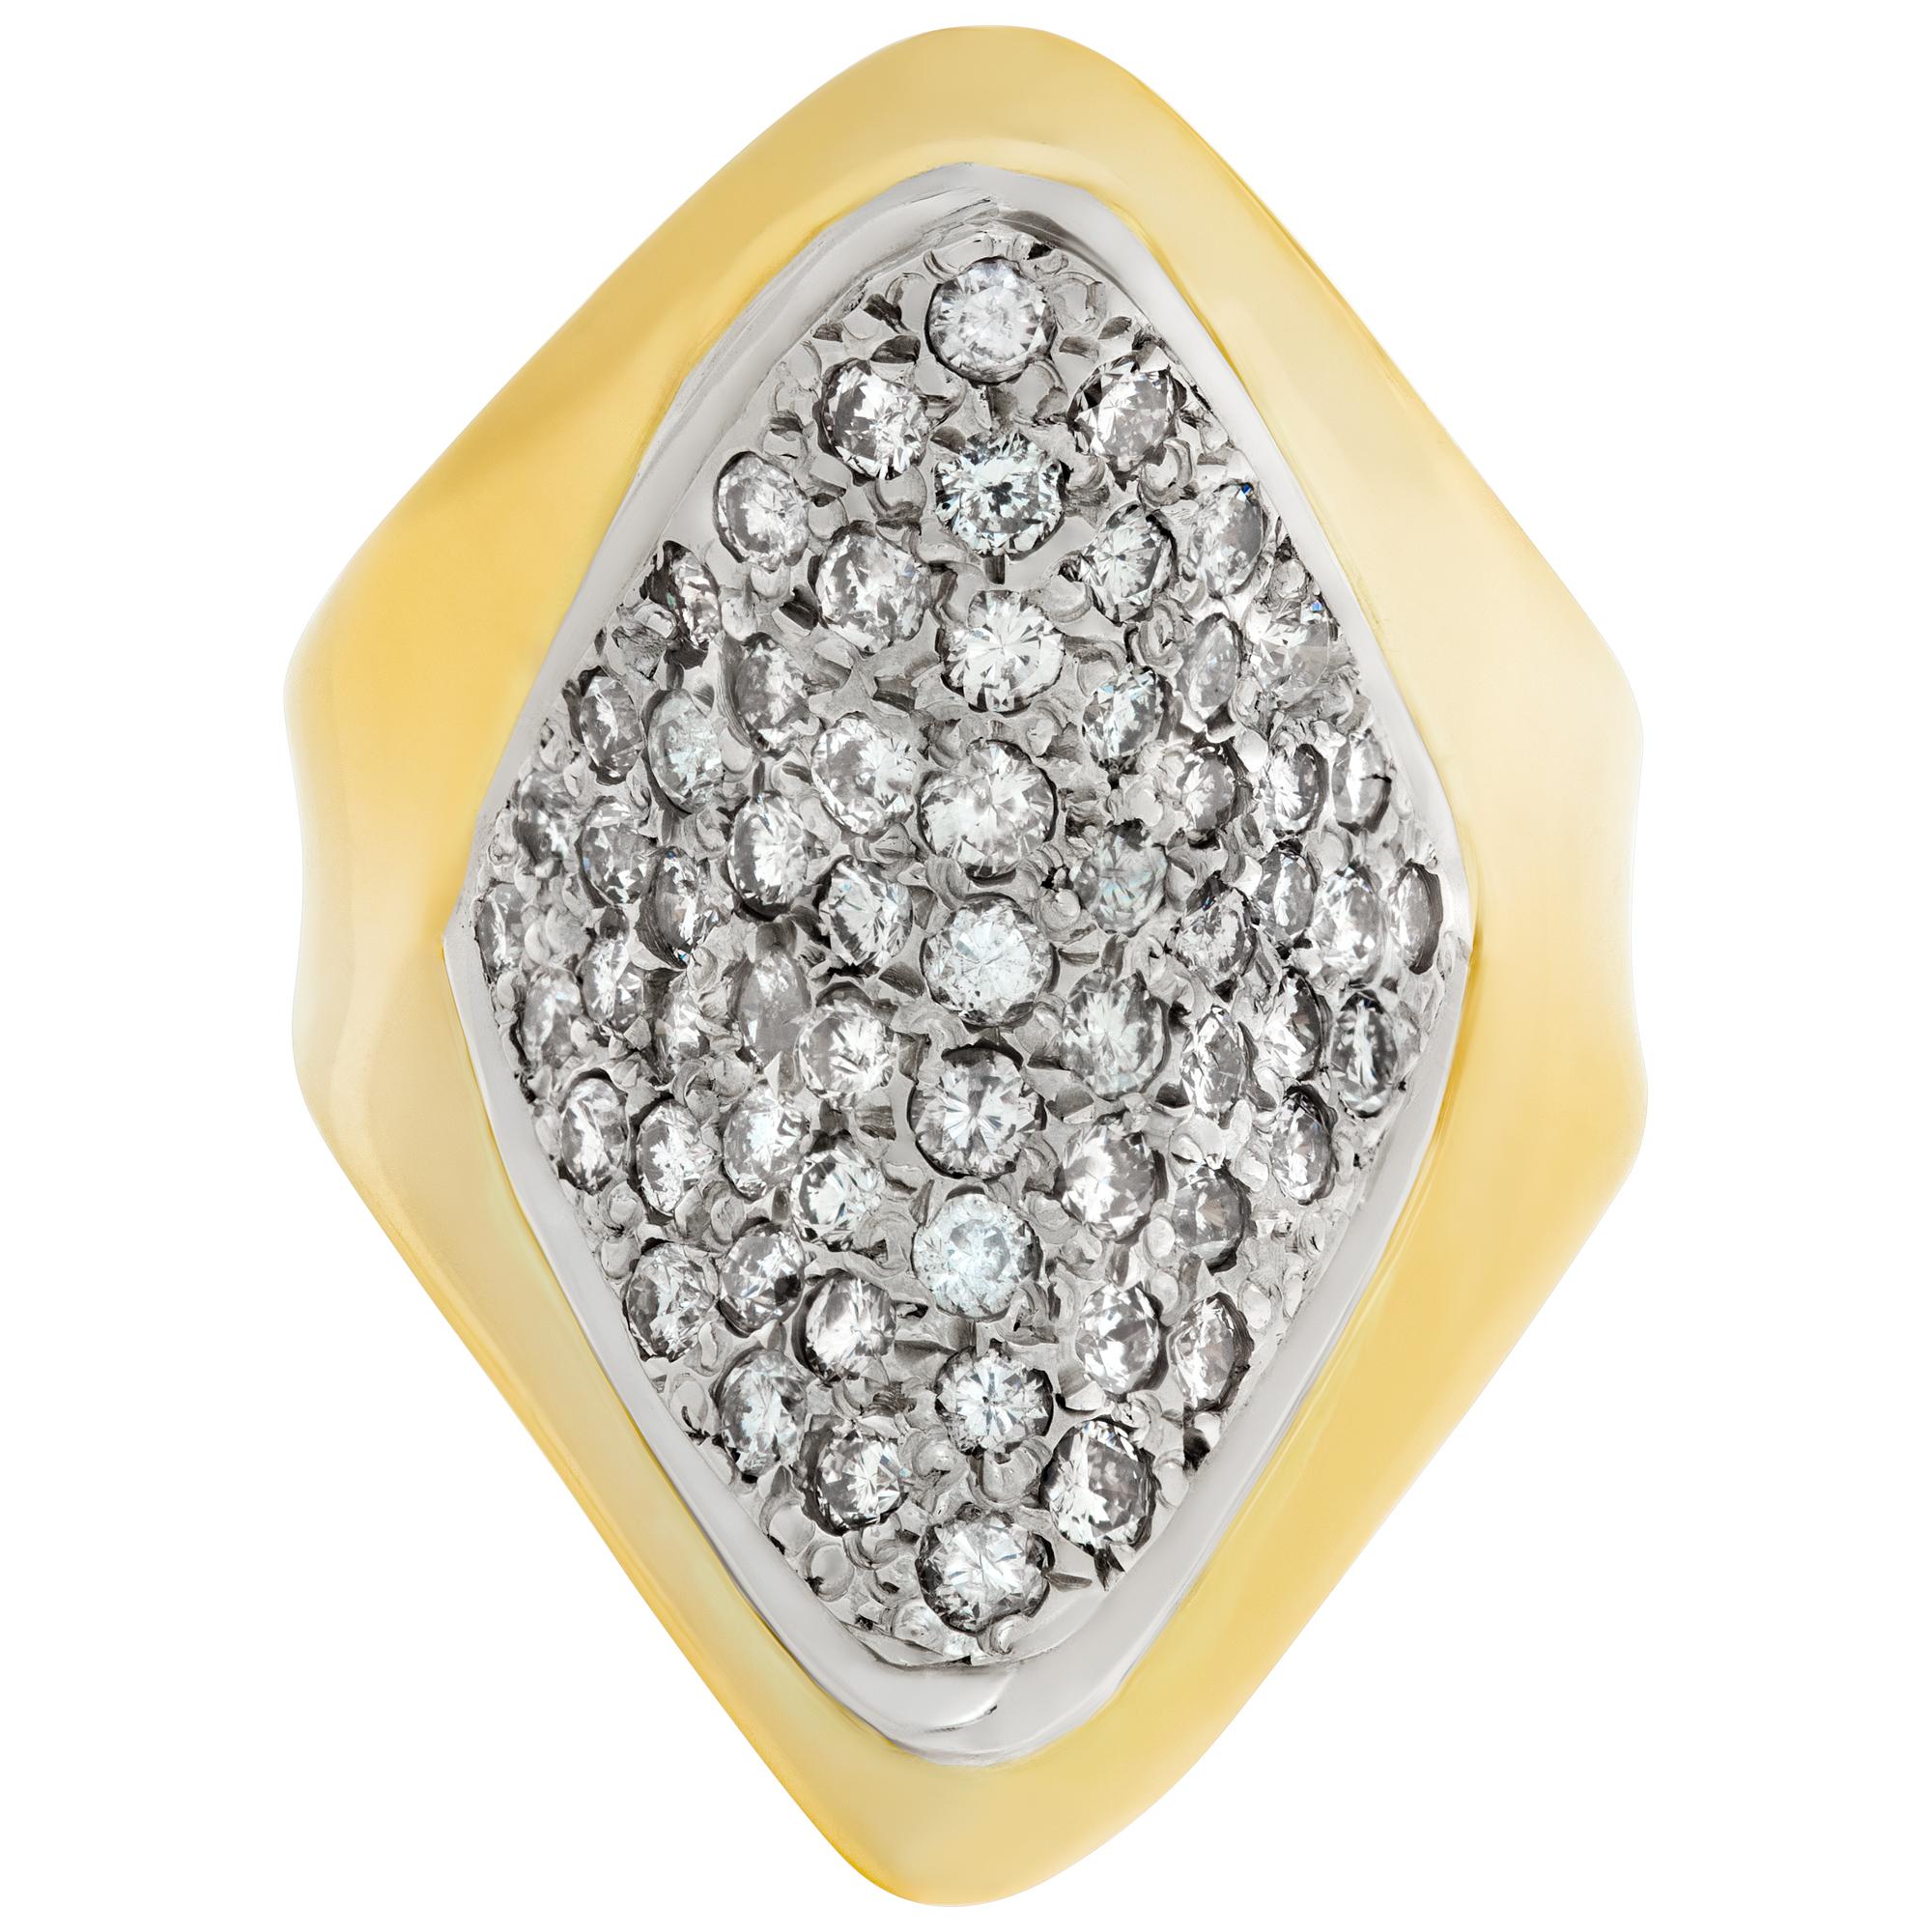 Modern diamonds ring in 18k. Round brilliant cut diamonds total approx.weight: 1.00 carat. All eye clean and white.. Height: 30mm (1.00 inches). Size 6.75This Diamond ring is currently size 6.75 and some items can be sized up or down, please ask! It